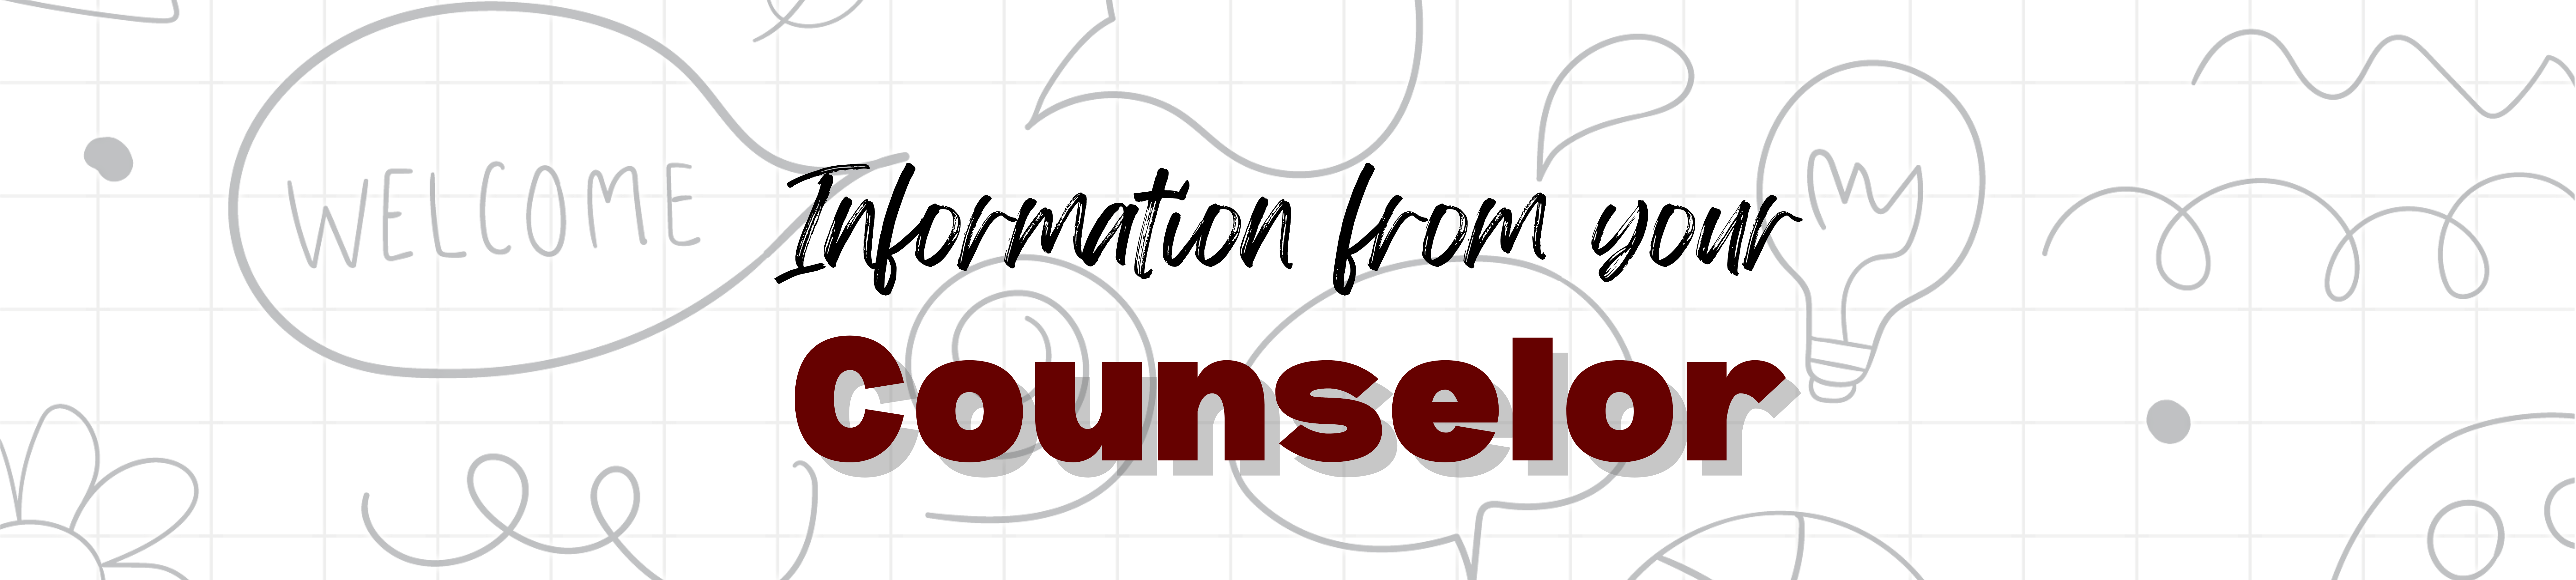 Information from your counselor